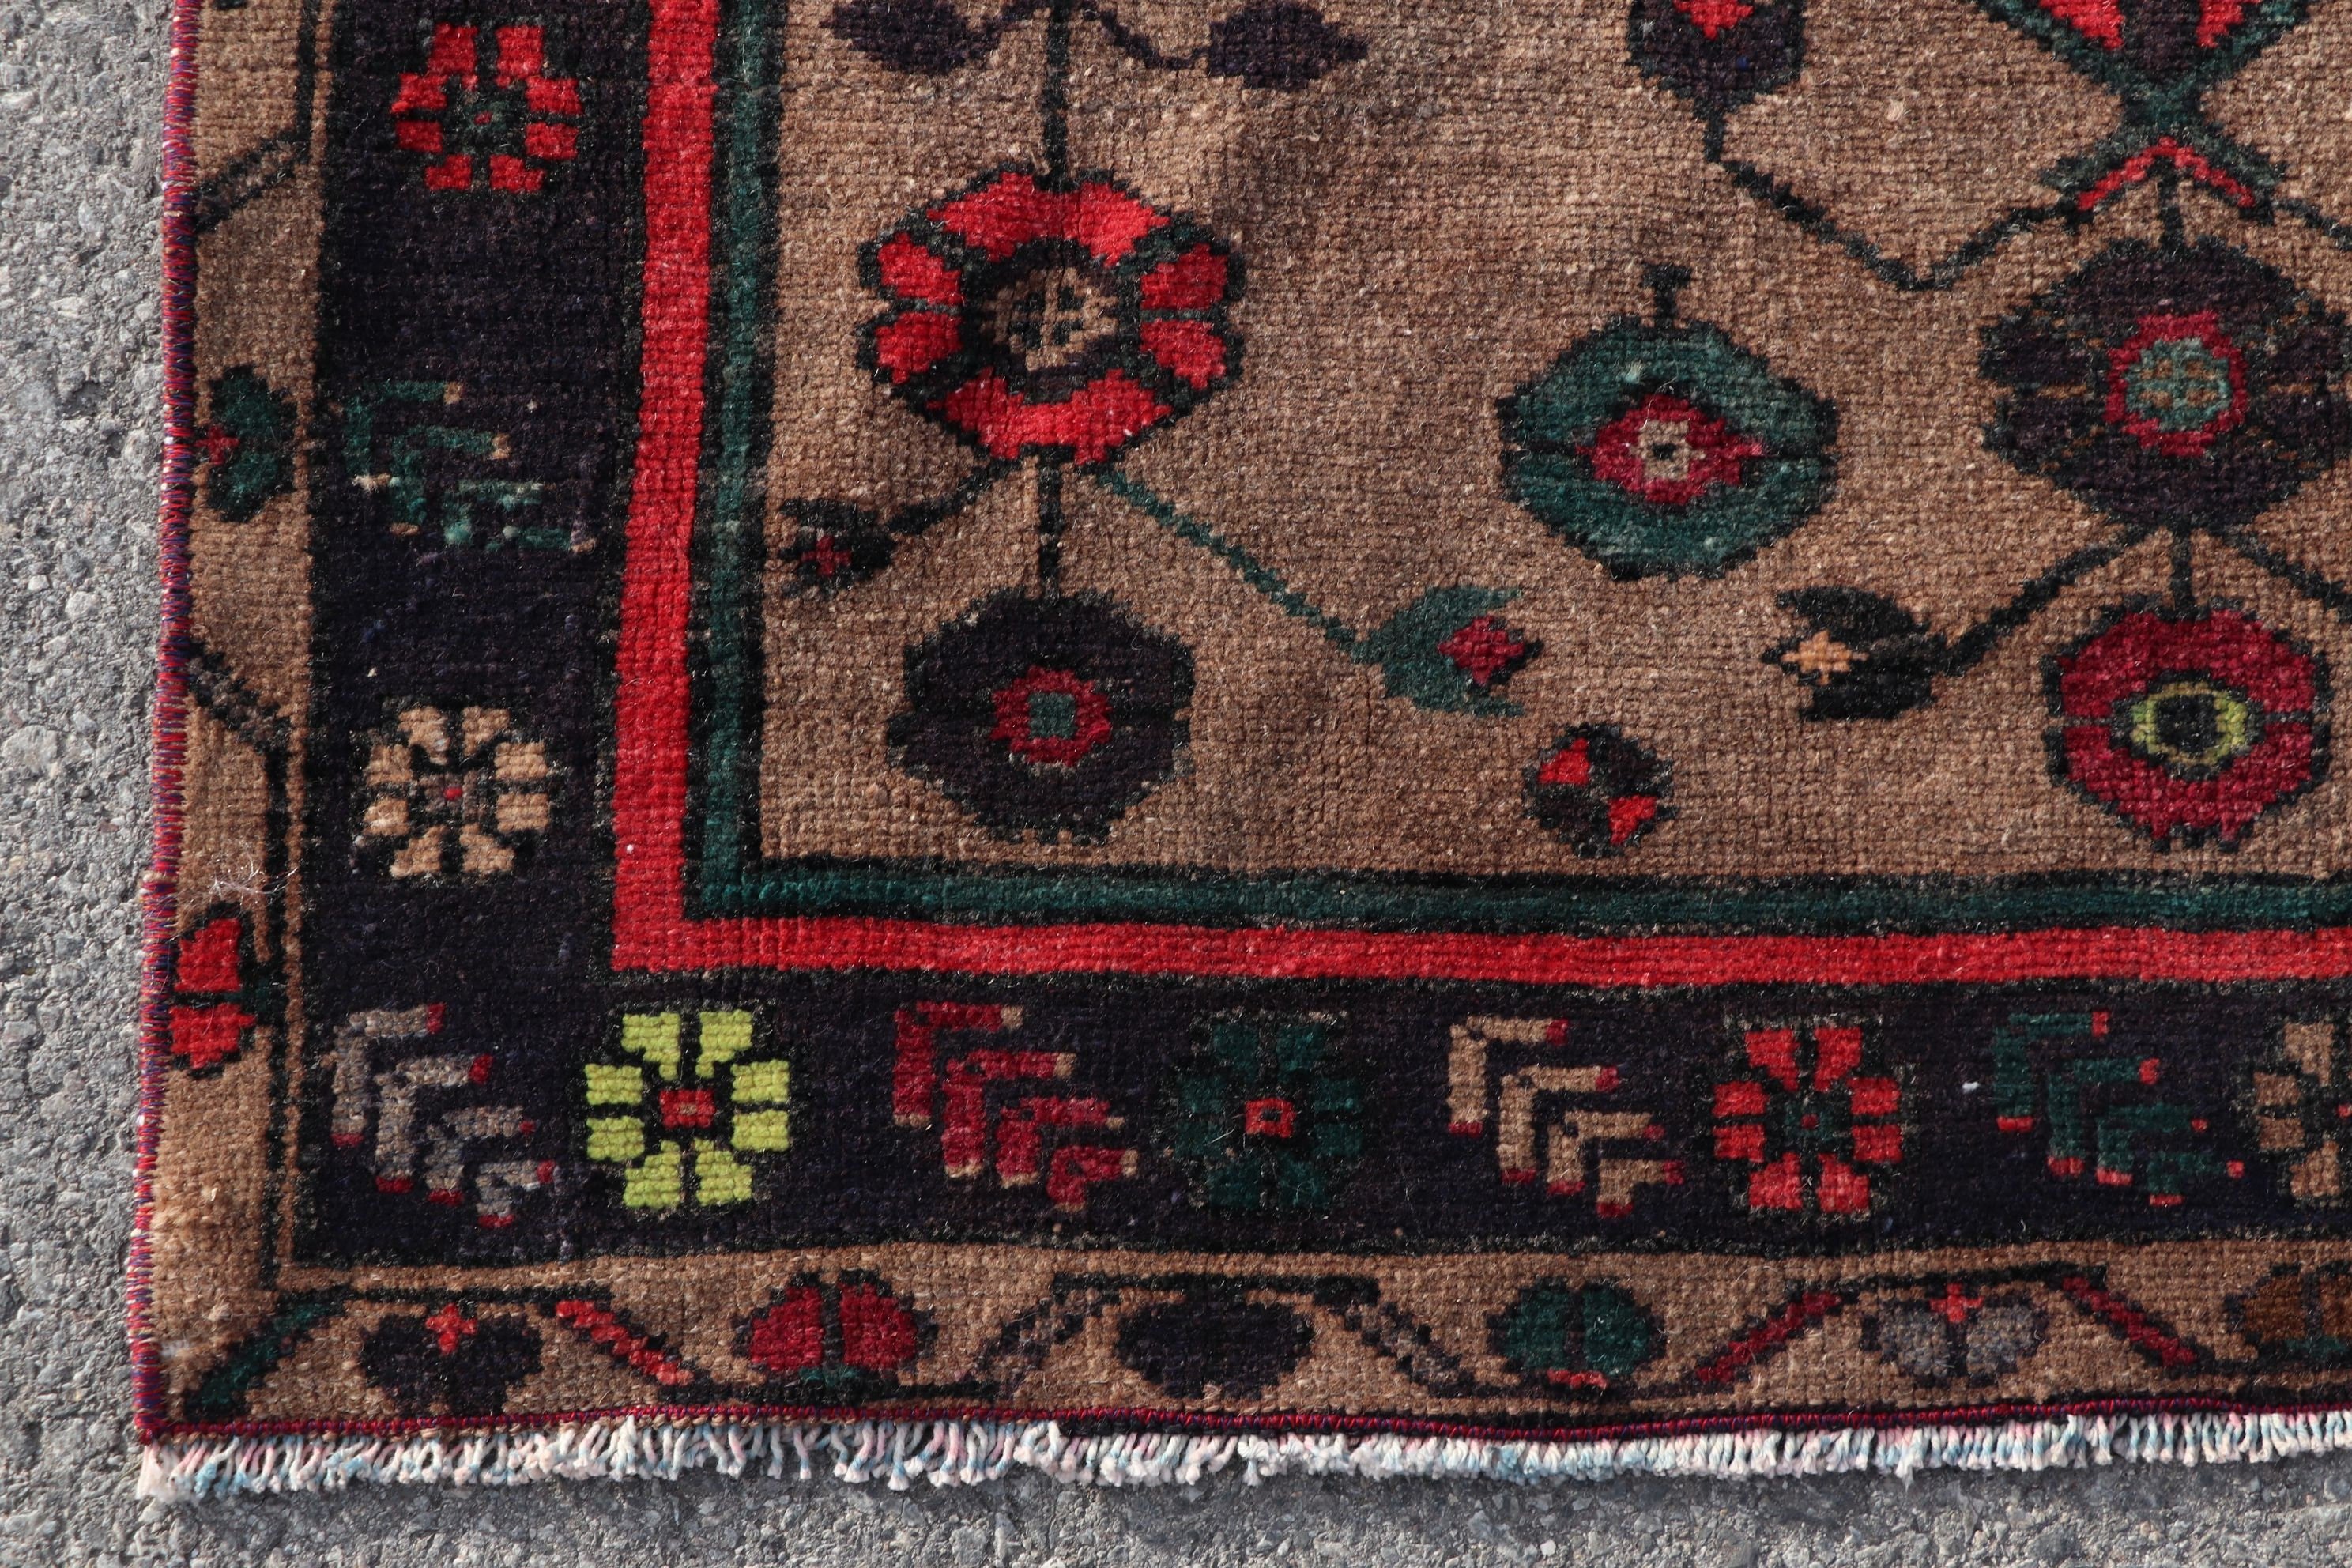 Rugs for Nursery, Anatolian Rugs, Turkish Rug, Vintage Rug, Floor Rug, Nursery Rug, Black Floor Rugs, 3.4x6.3 ft Accent Rugs, Entry Rug